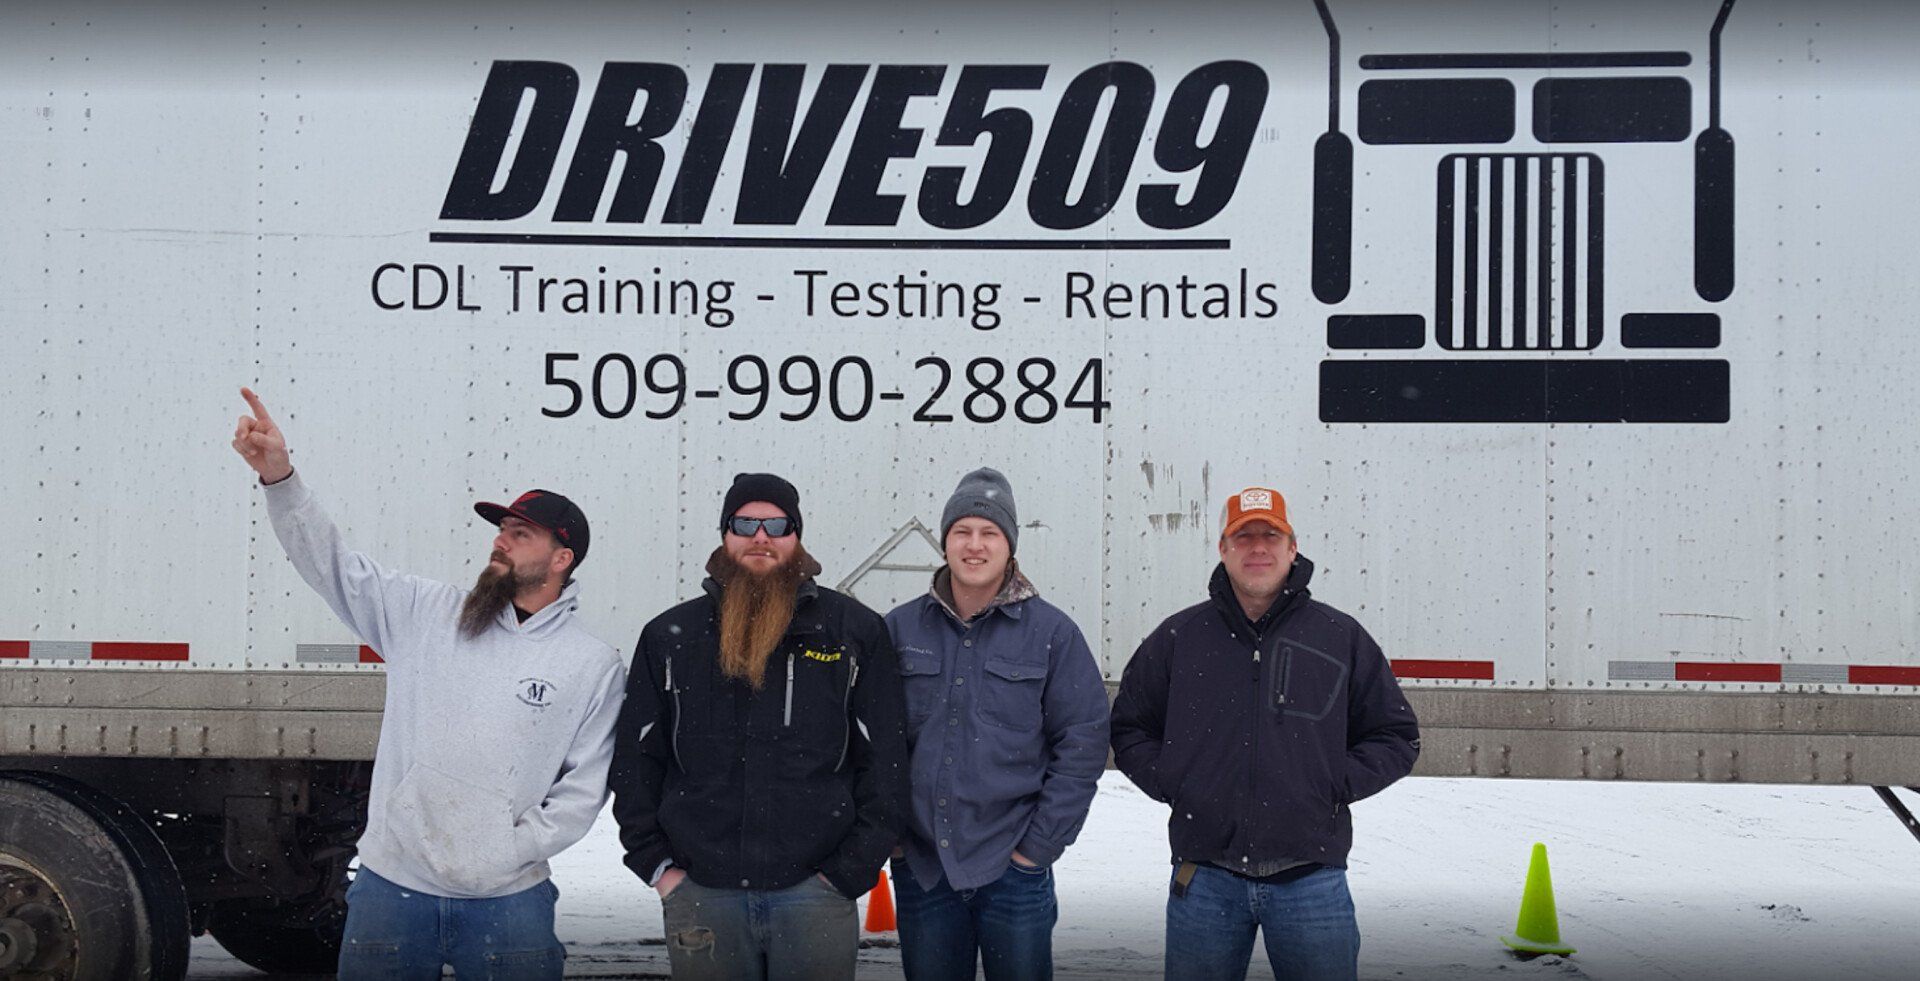 drive509 team standing in front of semi-truck getting ready for a cdl school session